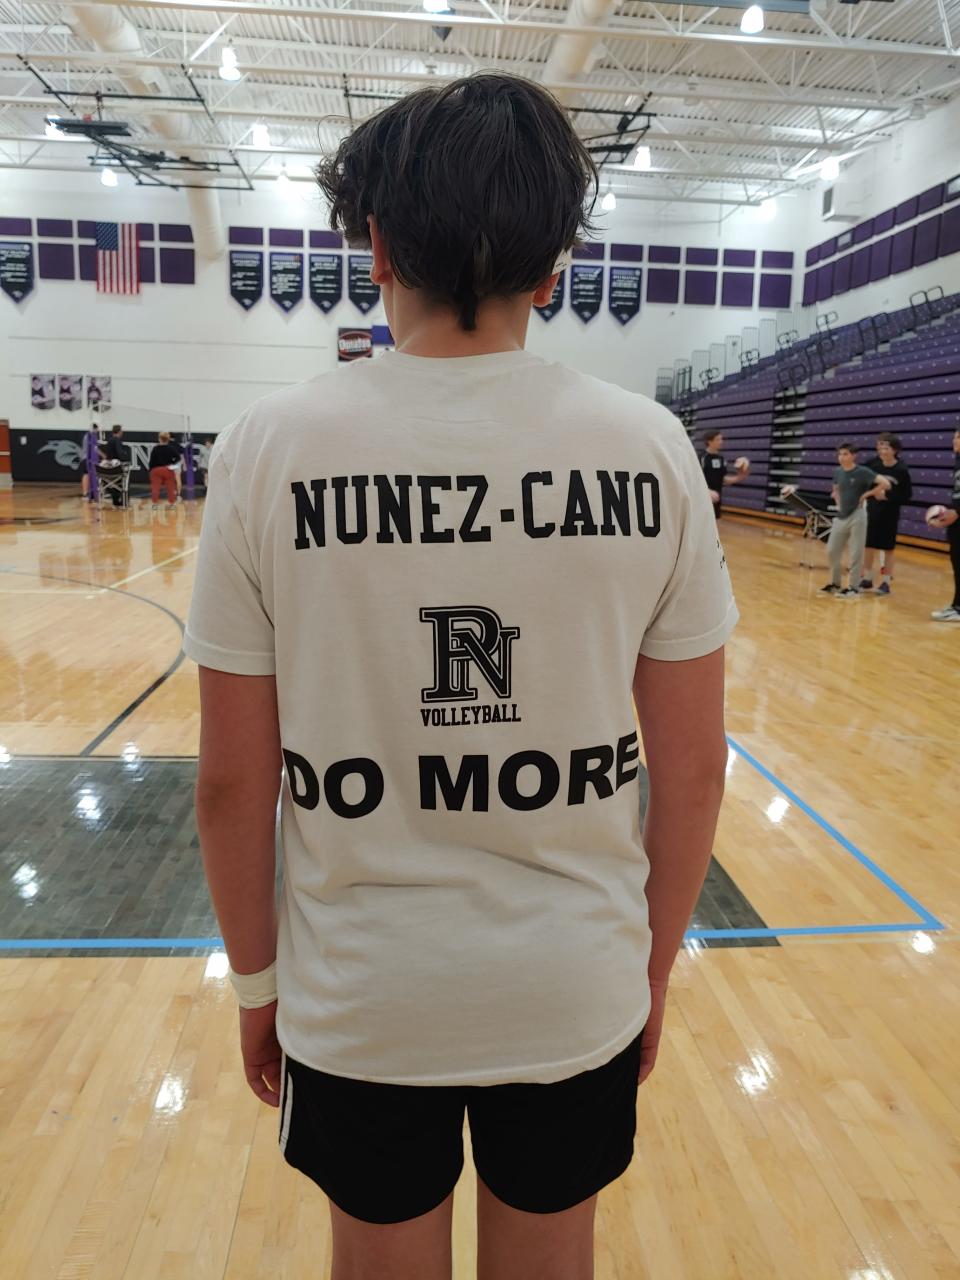 Drew Vensko and several Panthers wear T-shirts with Andres Nunez Cano's name on the back.